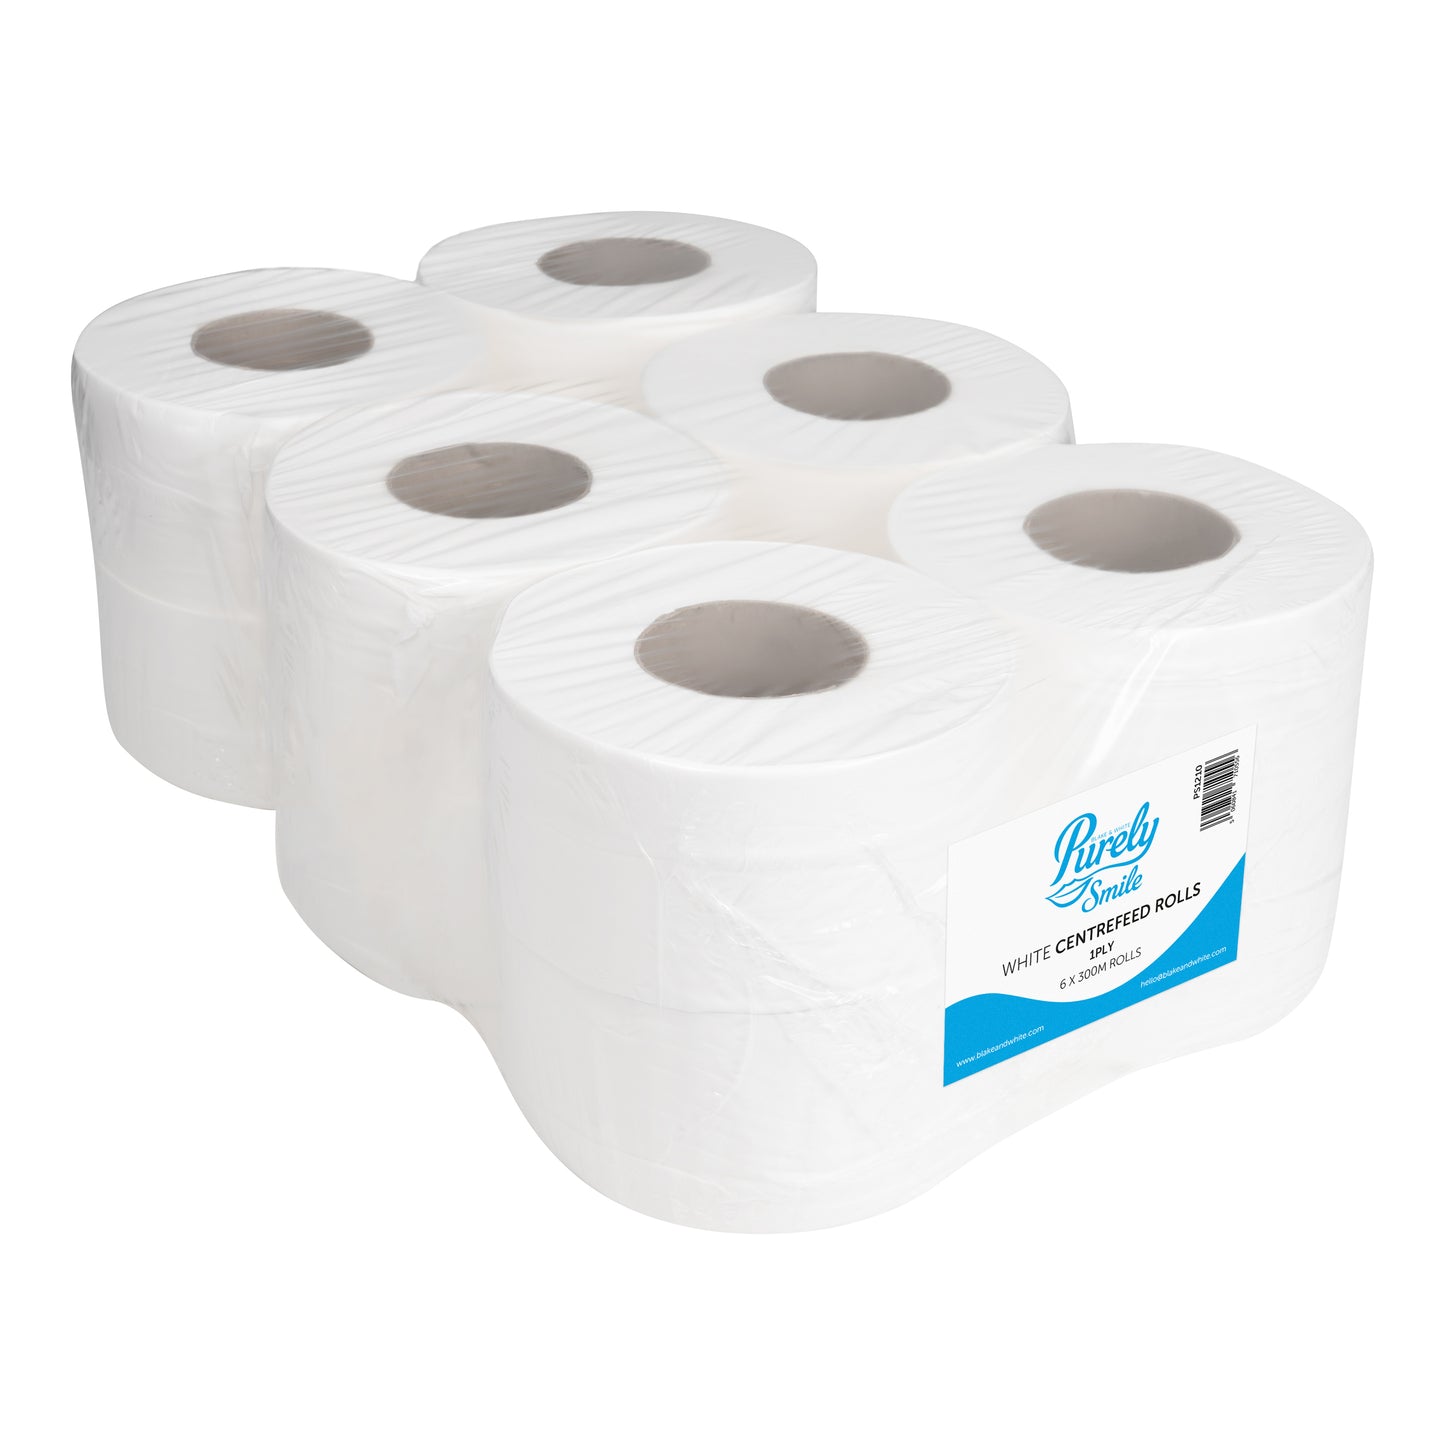 Purely Smile Centrefeed Rolls 1ply 300m White Pack of 6